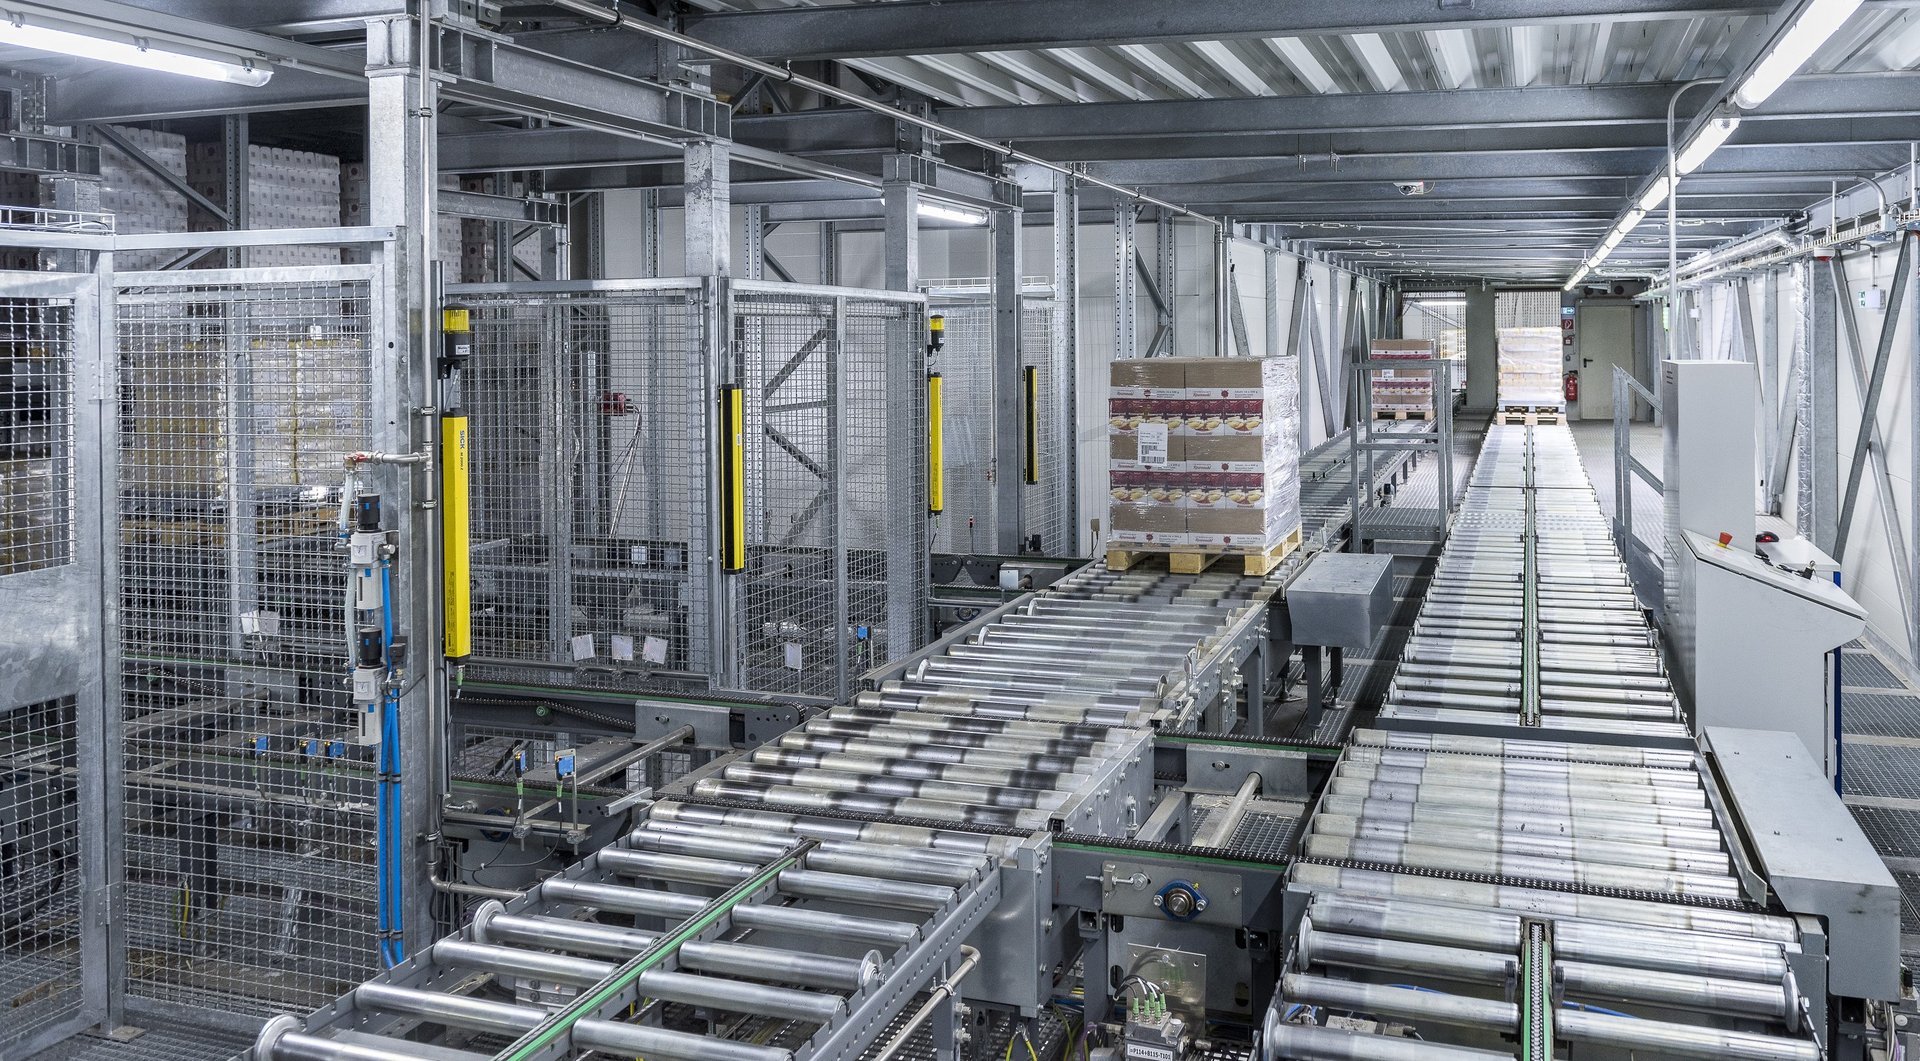 Software-controlled roller conveyors in an automated storage system